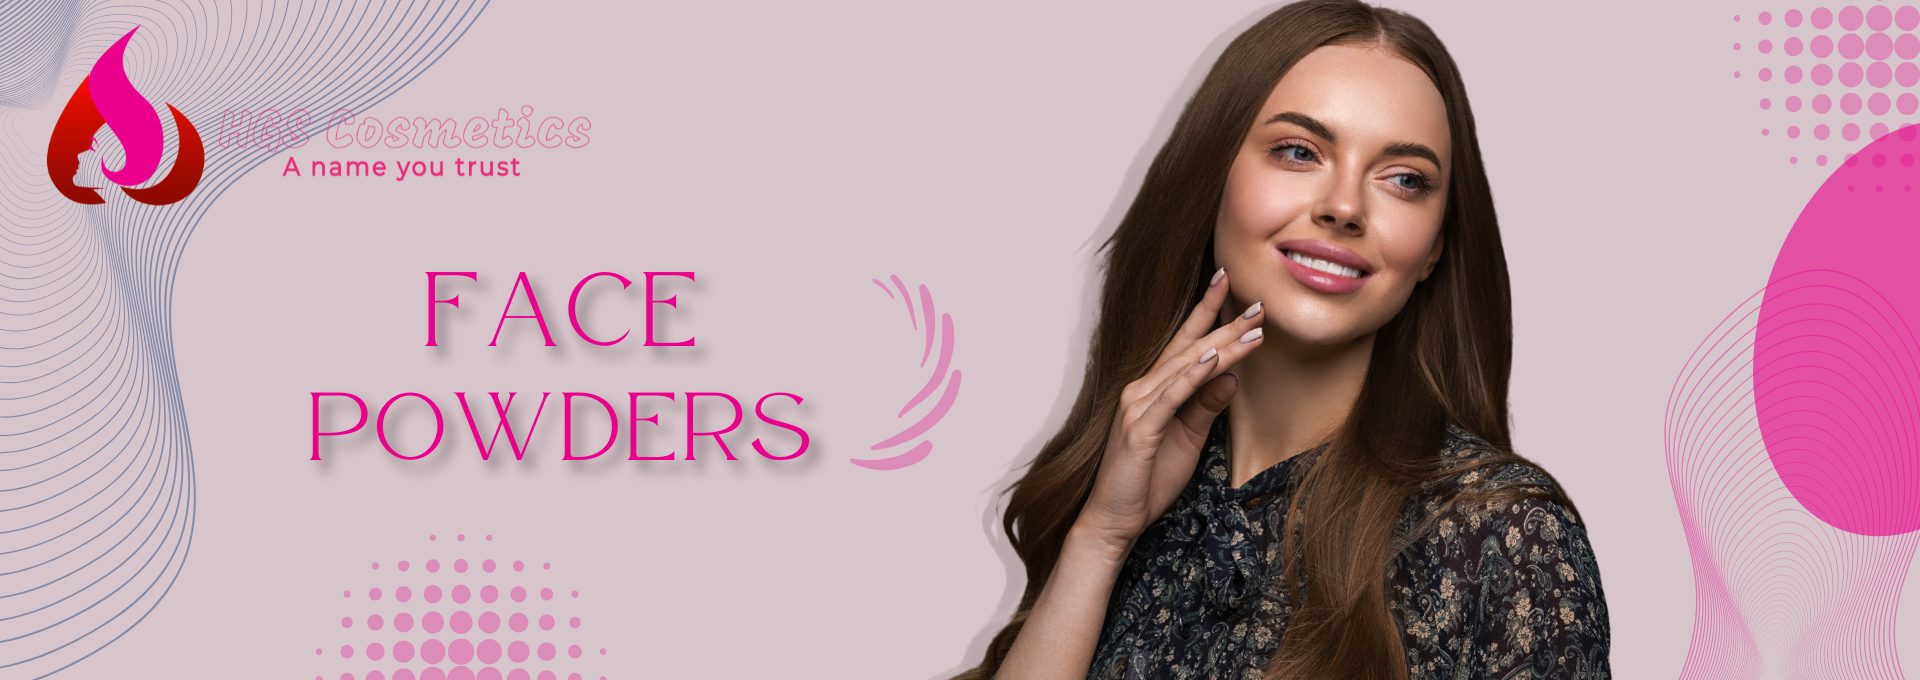 Shop Best Face Cosmetics products Online @ HGS Cosmetics